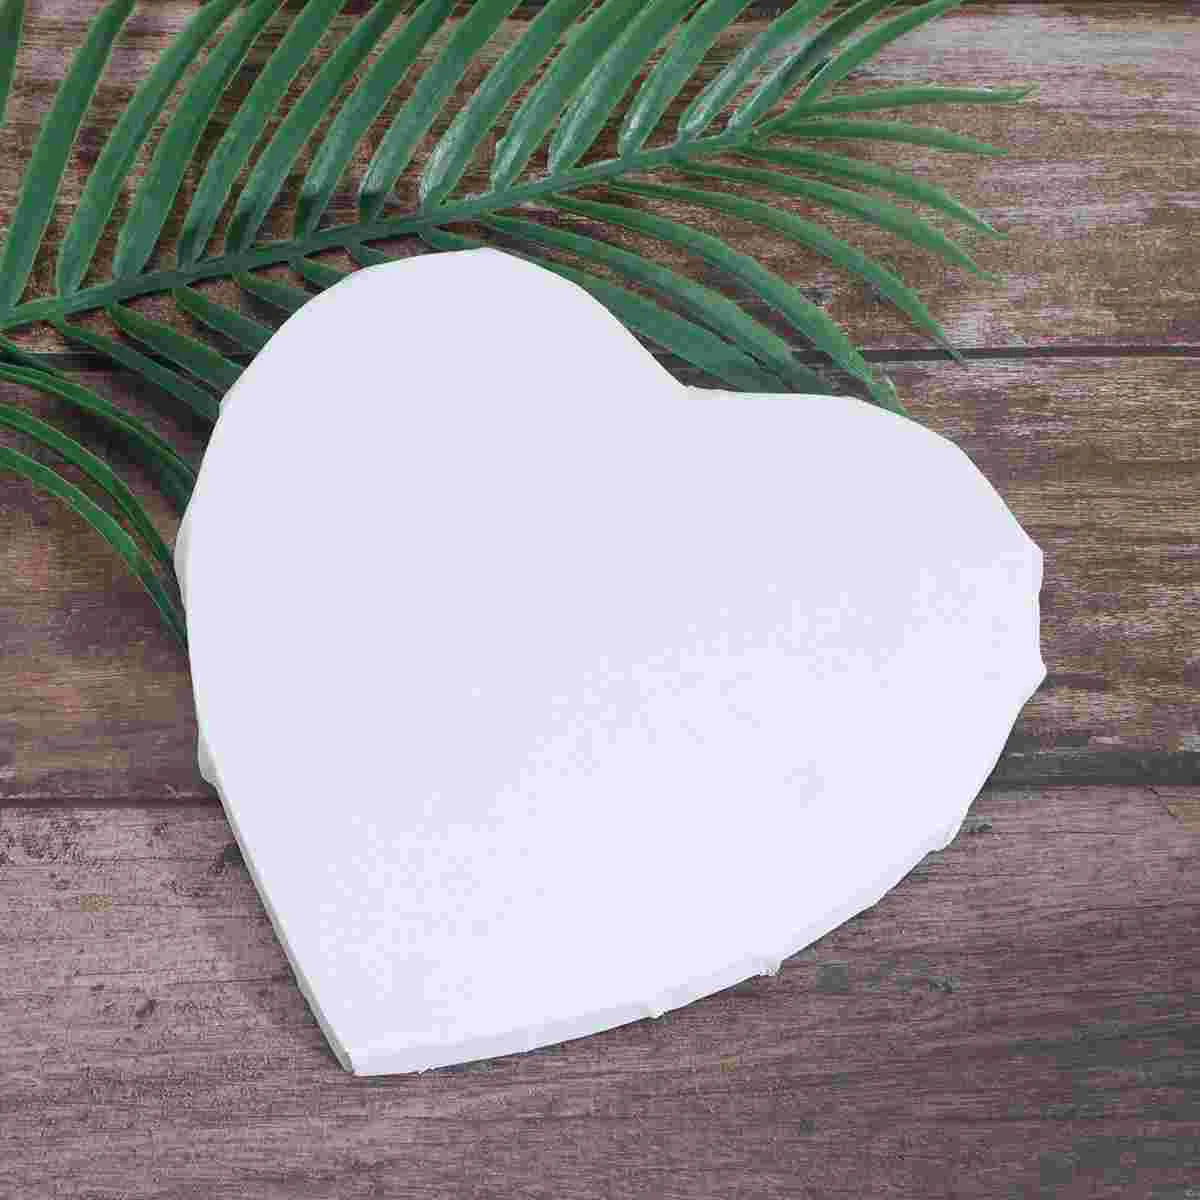 

2pcs Love Heart White Blank Canvas Panels Creative Wood Primed Framed Stretched Cotton Panel Board for Painting, Drawing, Oil,